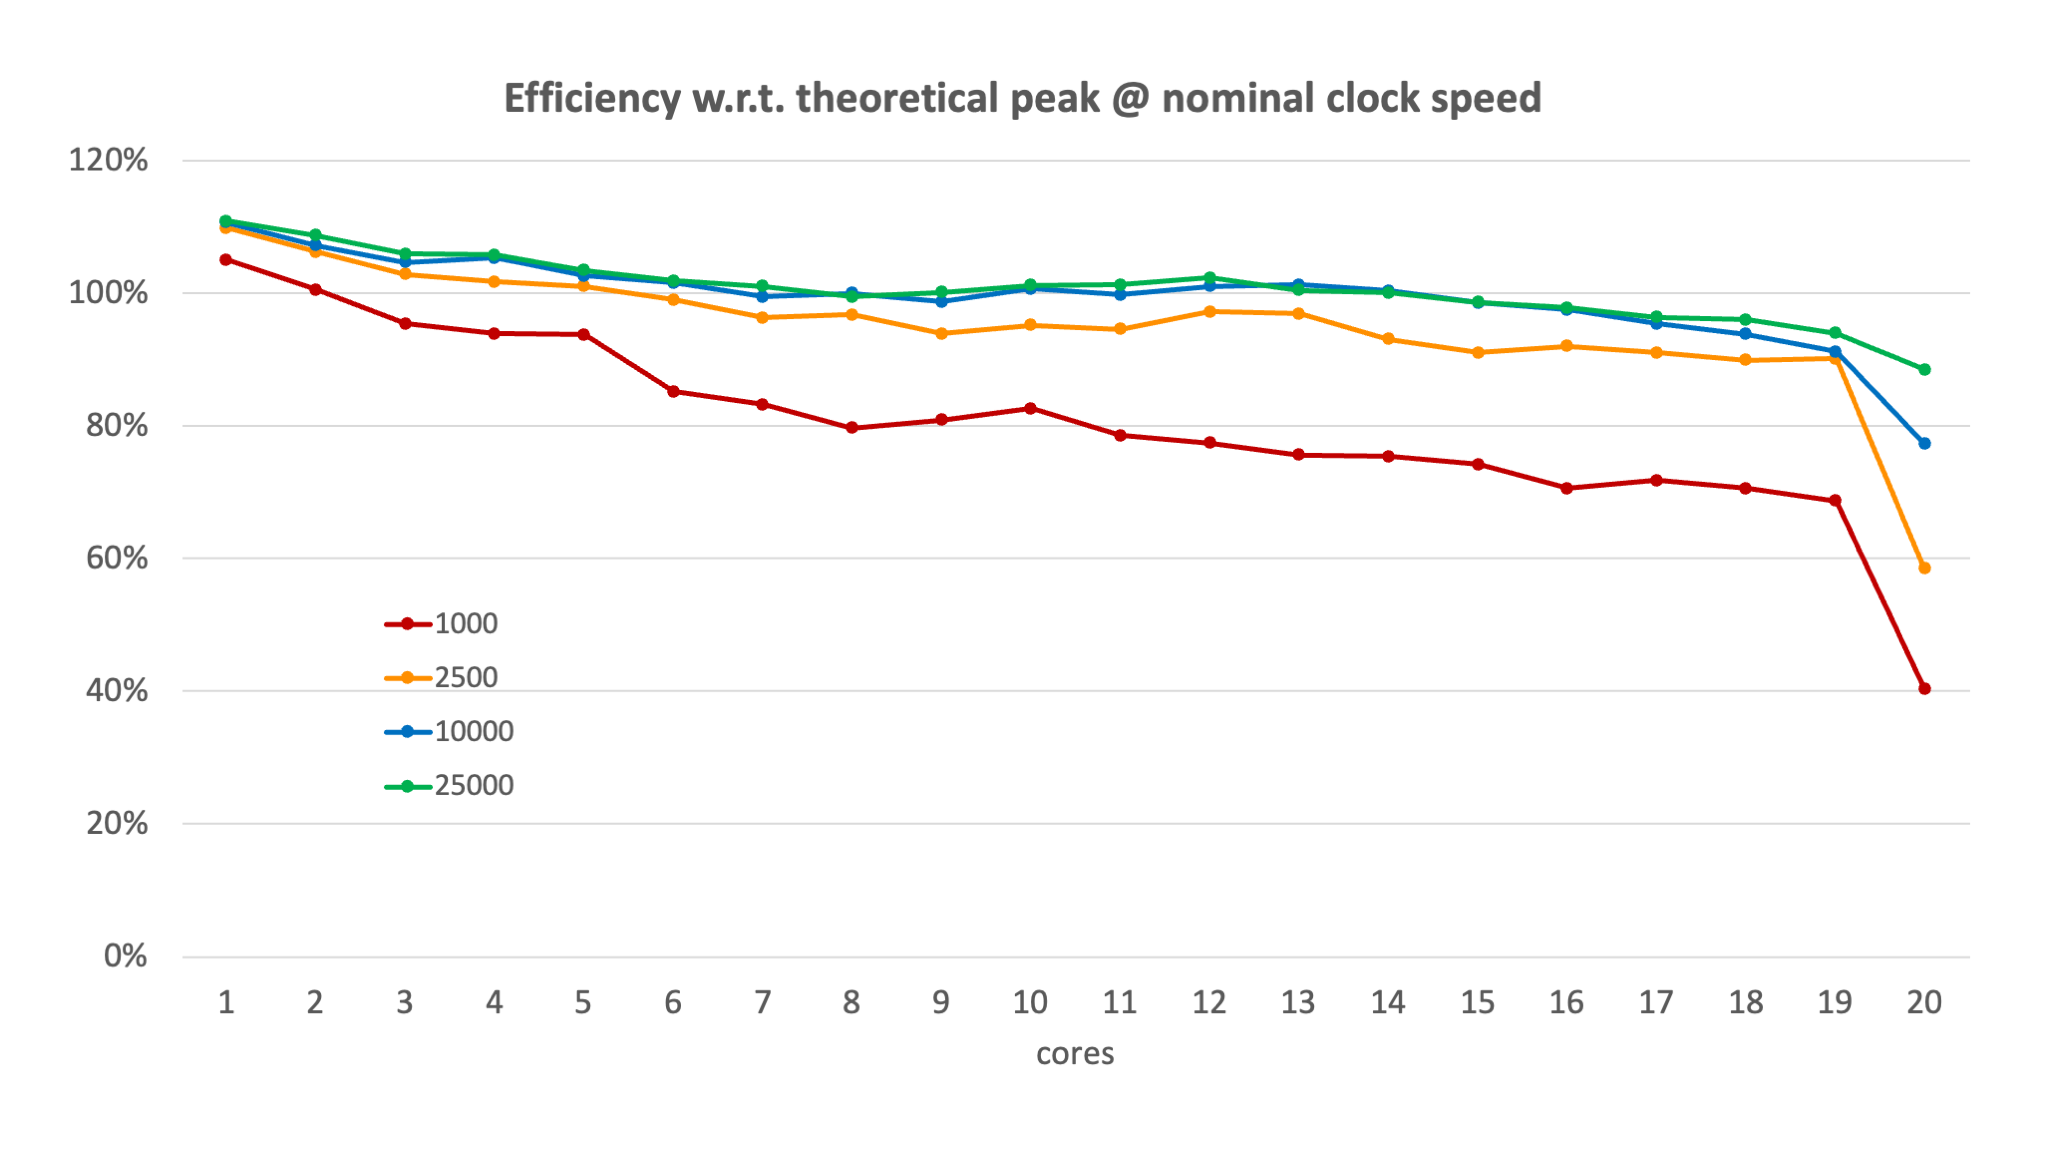 Efficiency of DGEMM with respect to the theoretical peak performance at the nominal clock speed